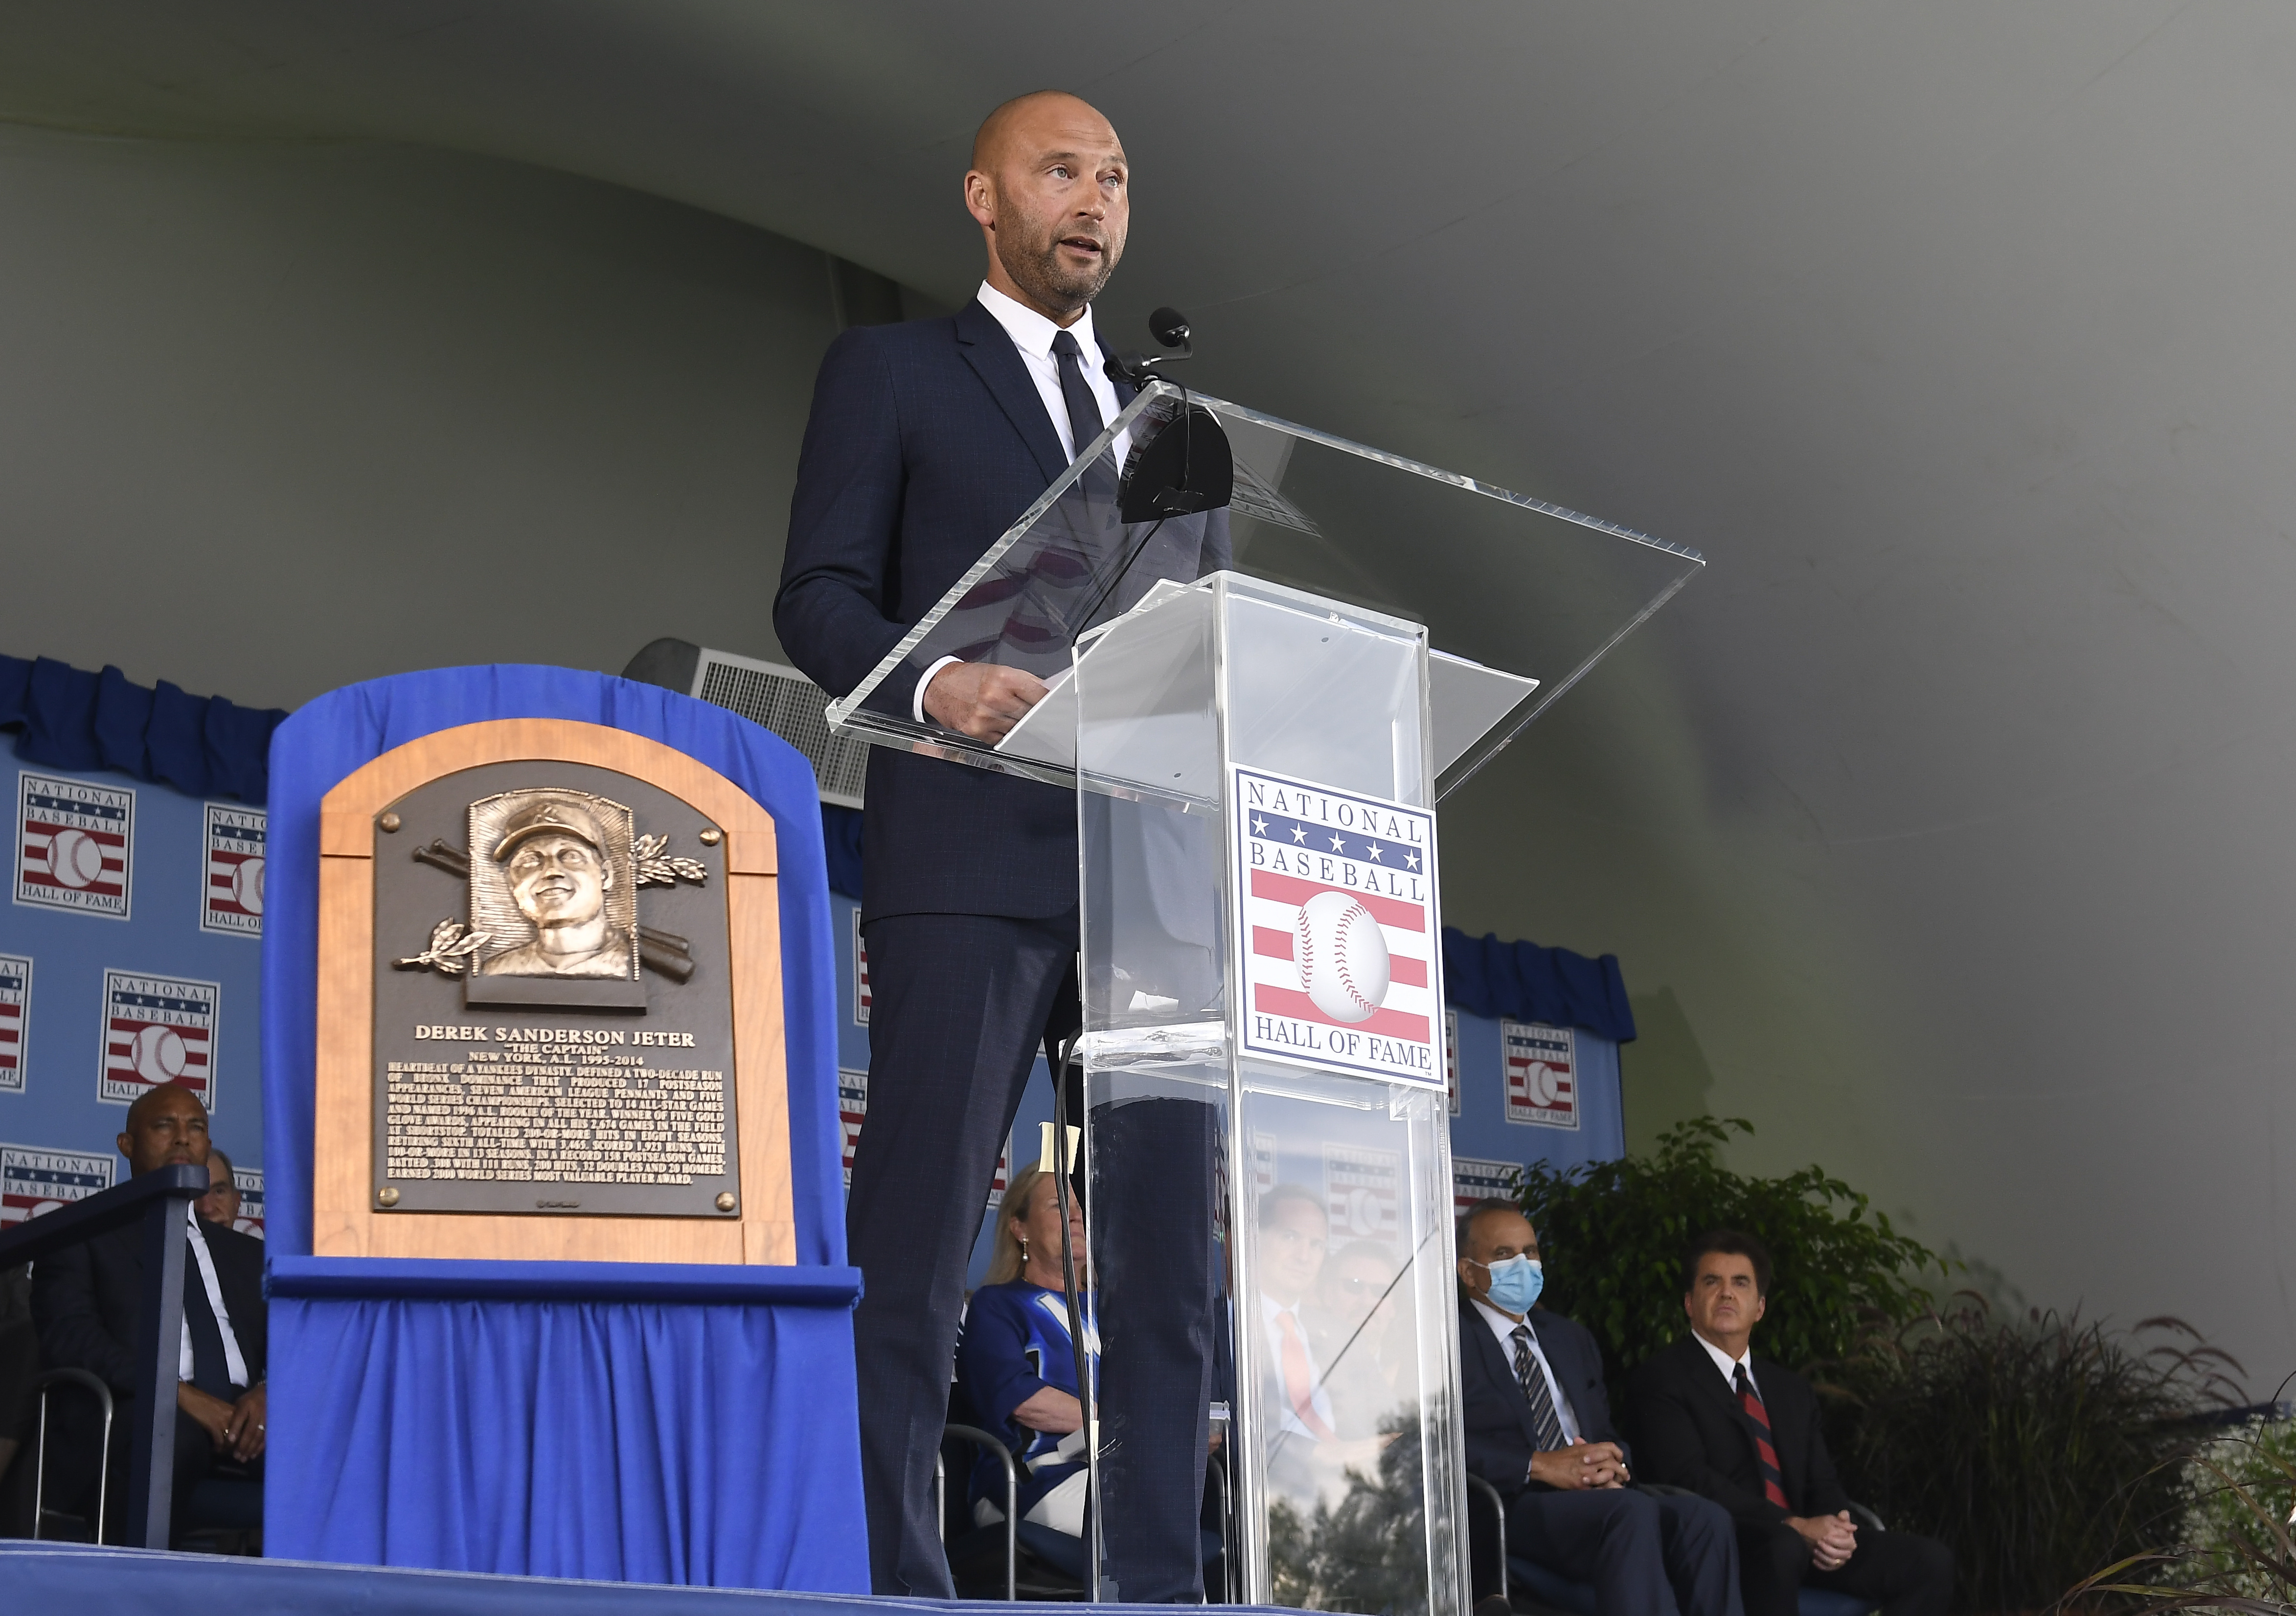 Derek Jeter's 2 Kids Attend Hall Of Fame Induction With Hannah